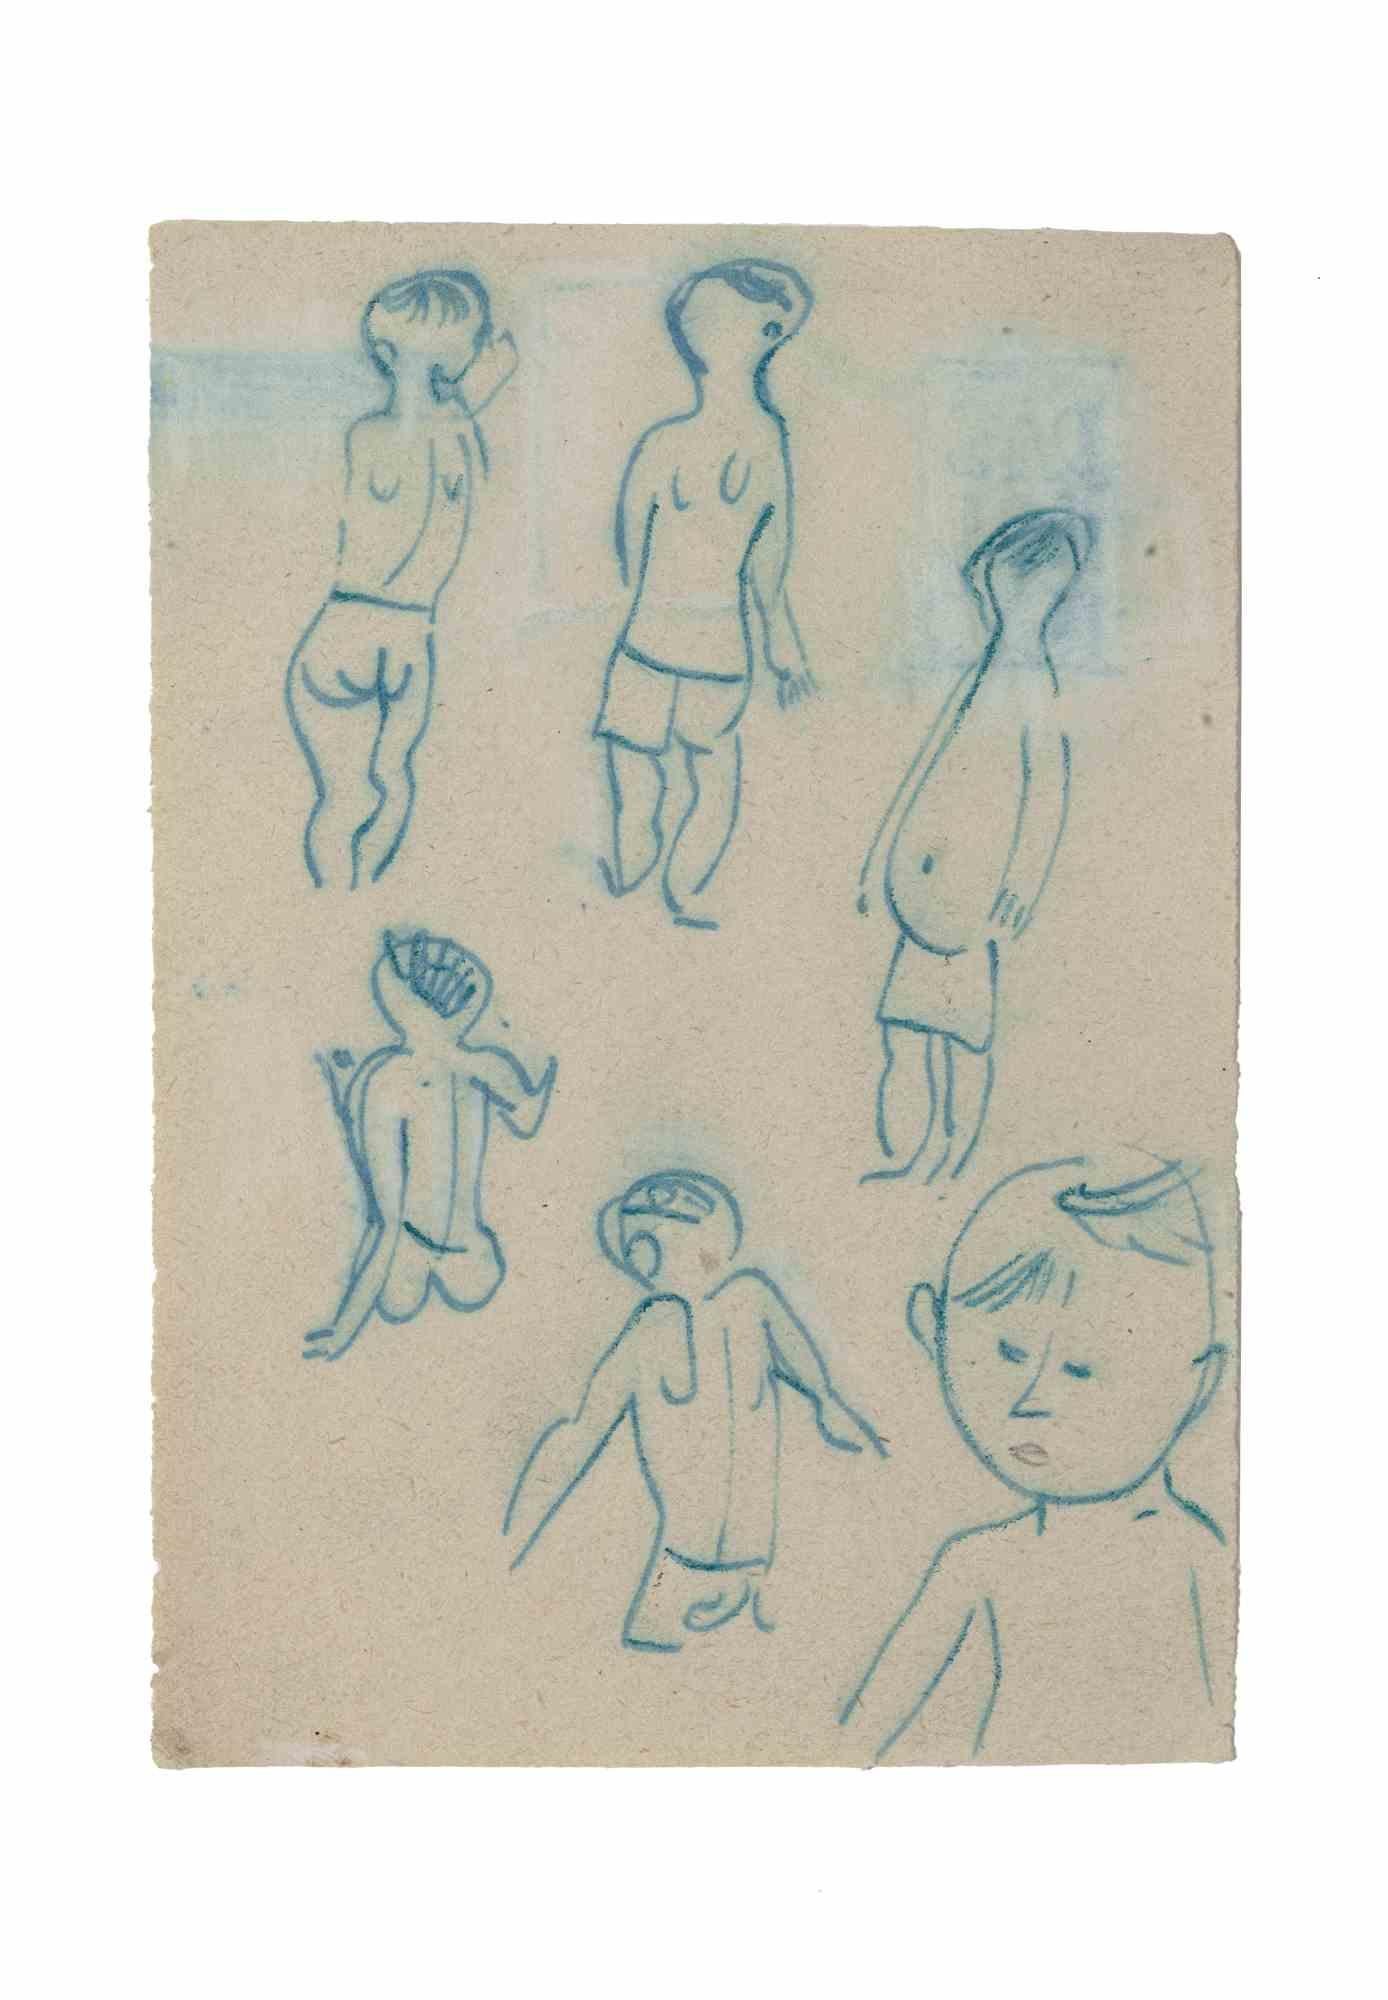 Unknown Figurative Art - Sketches - Original Drawing - Mid-20th Century